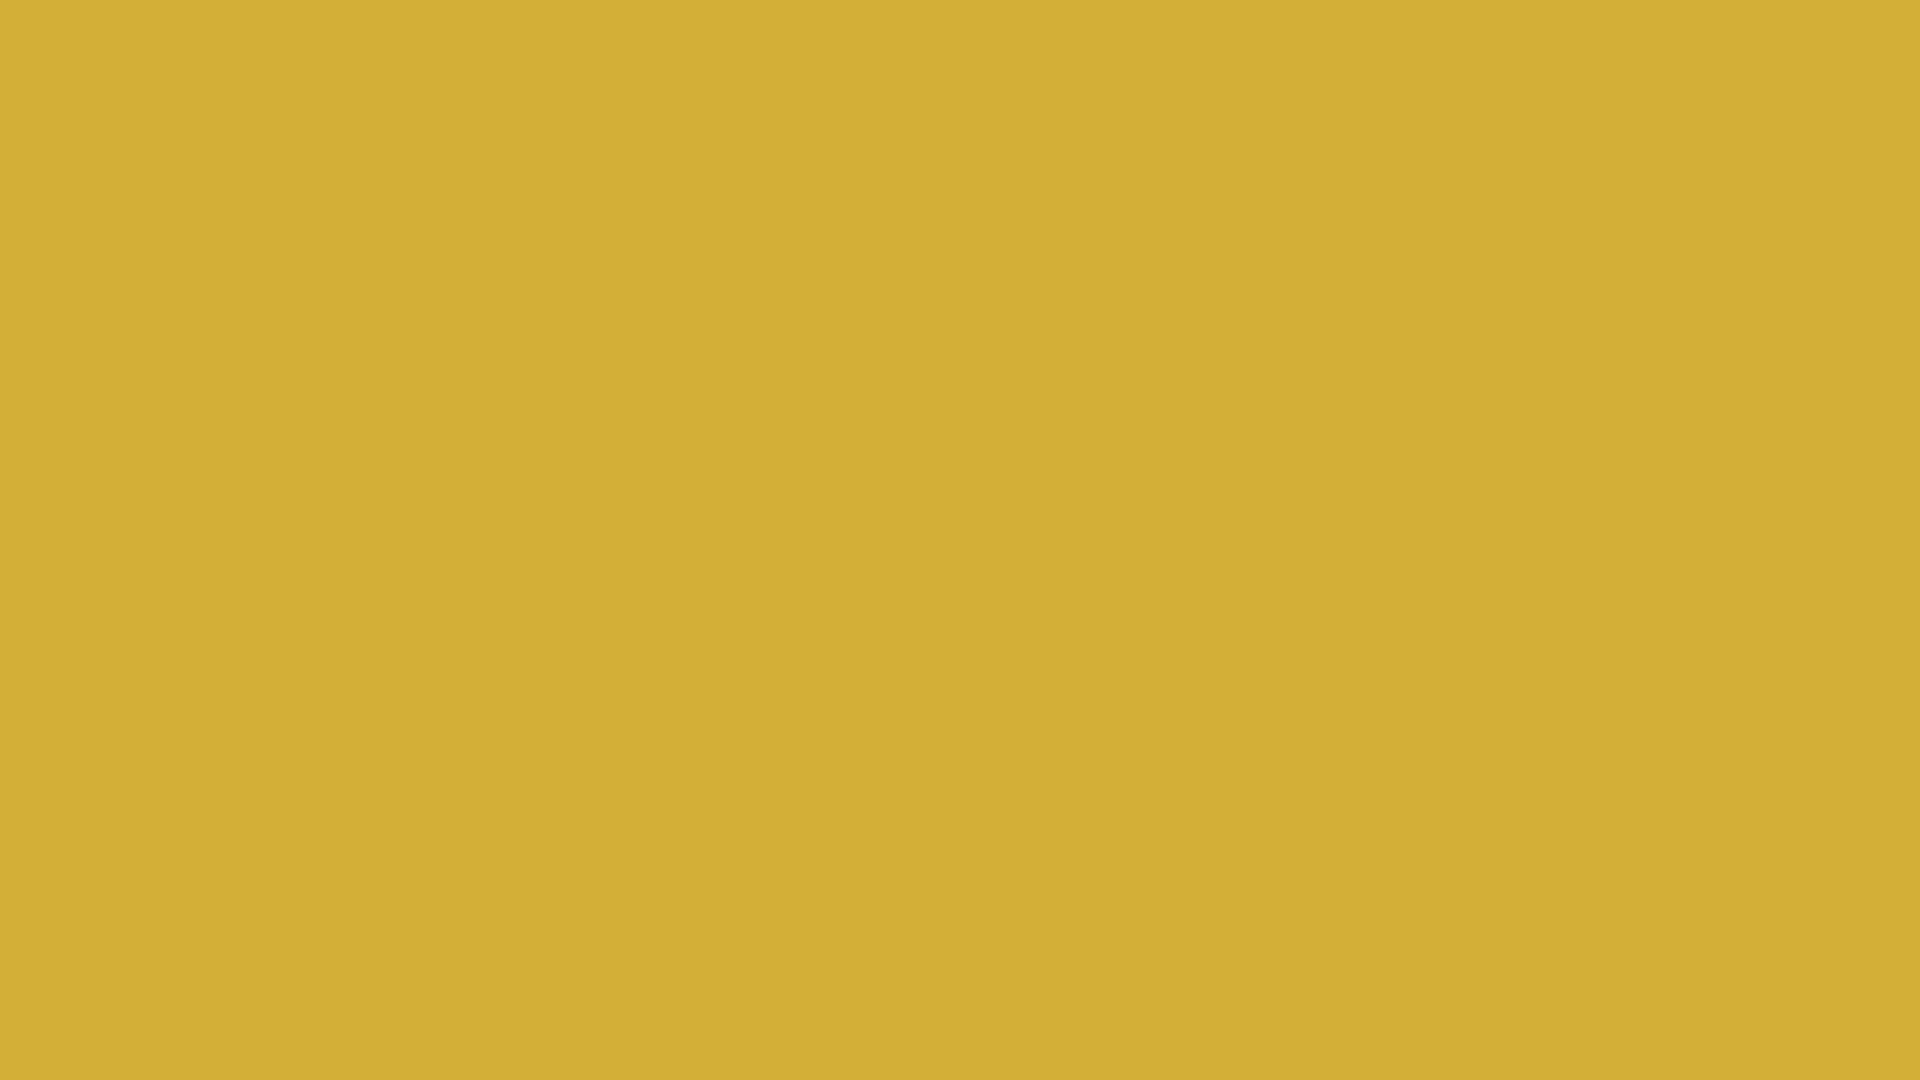 1920x1080  Gold Metallic Solid Color Background